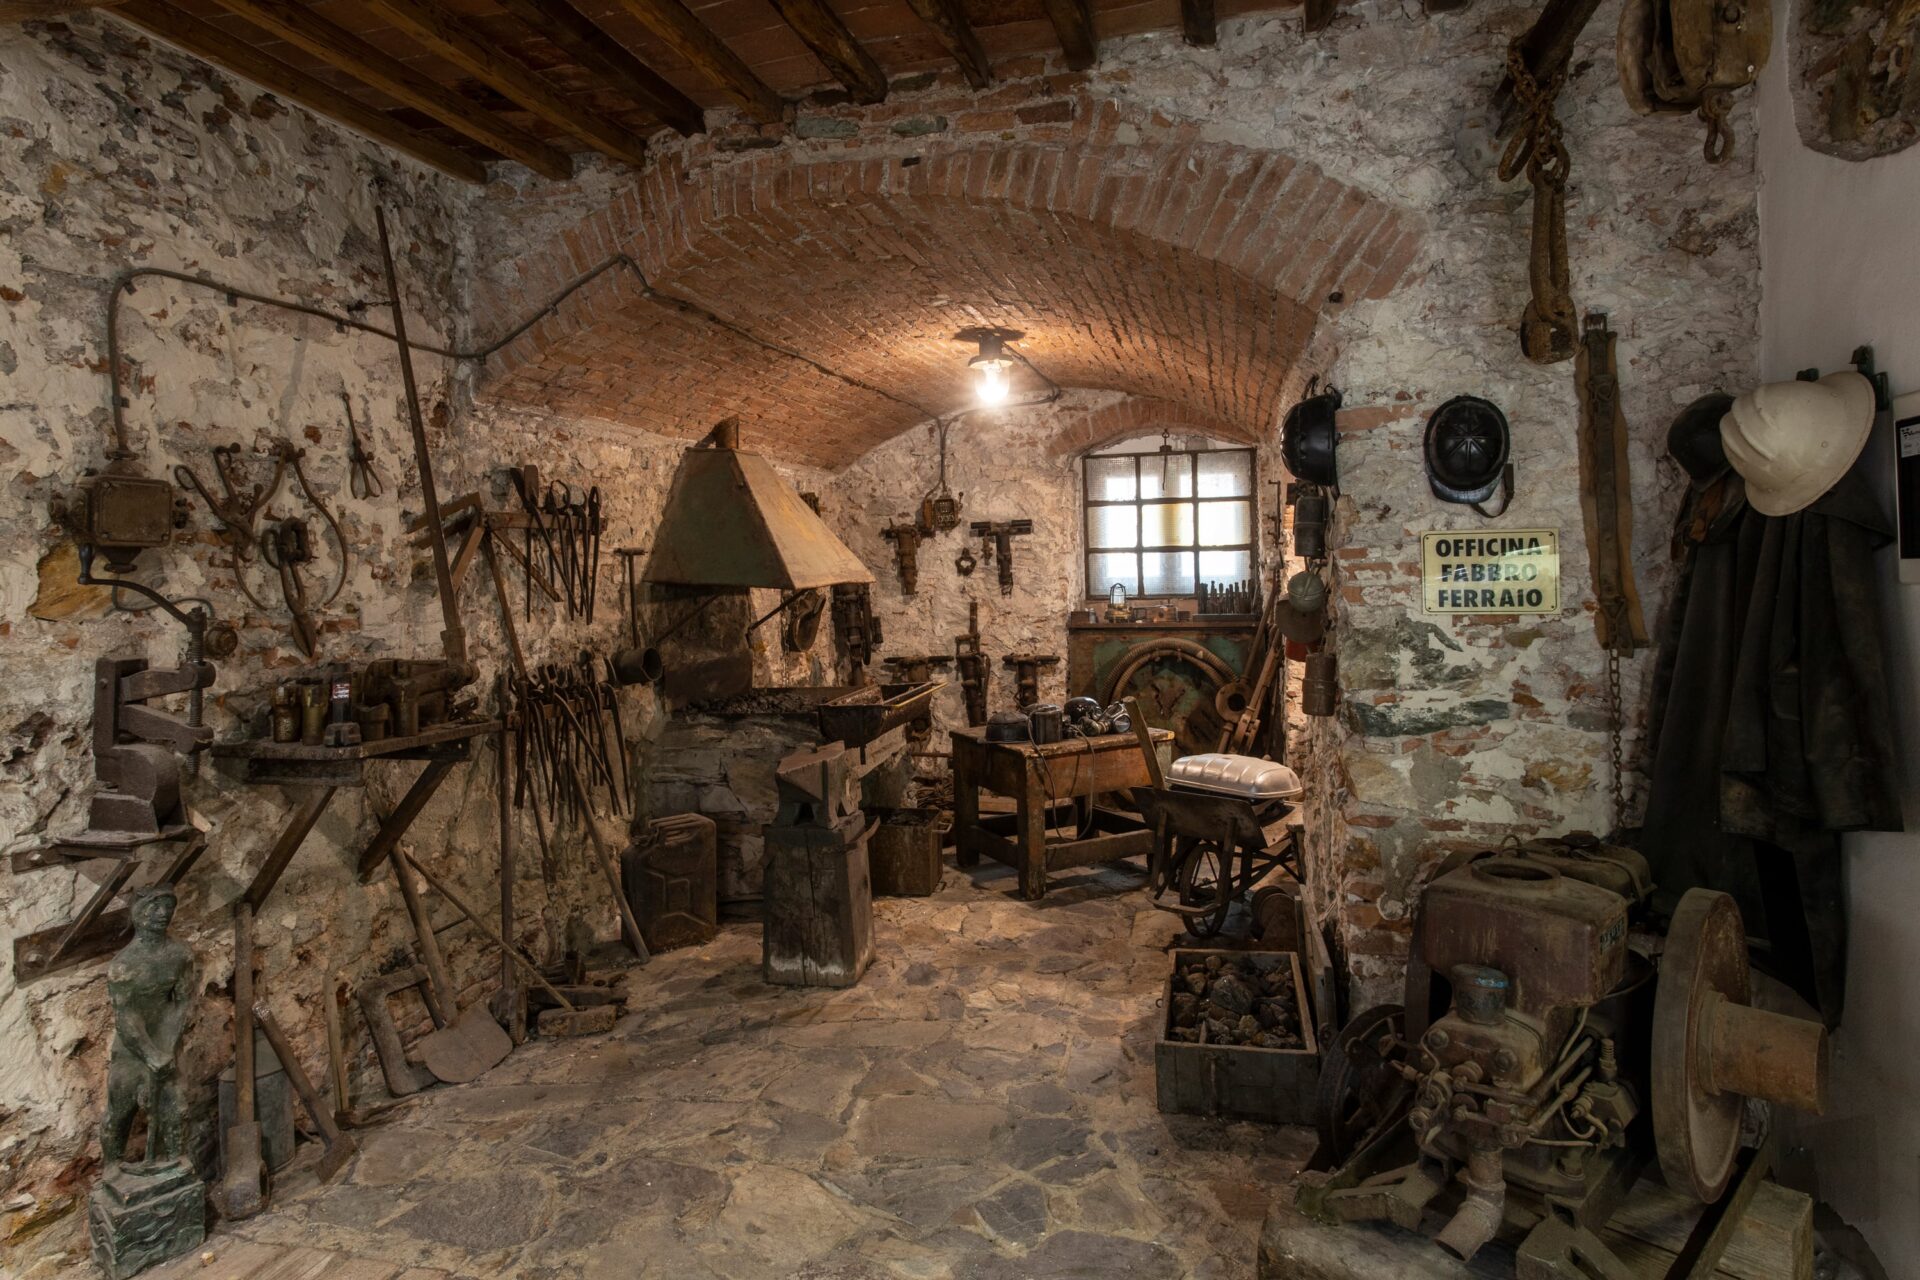 Museum of Elba Minerals and Mining Art in Rio Marina. Photo: R. Ridi / Museum System of the Tuscan Archipelago